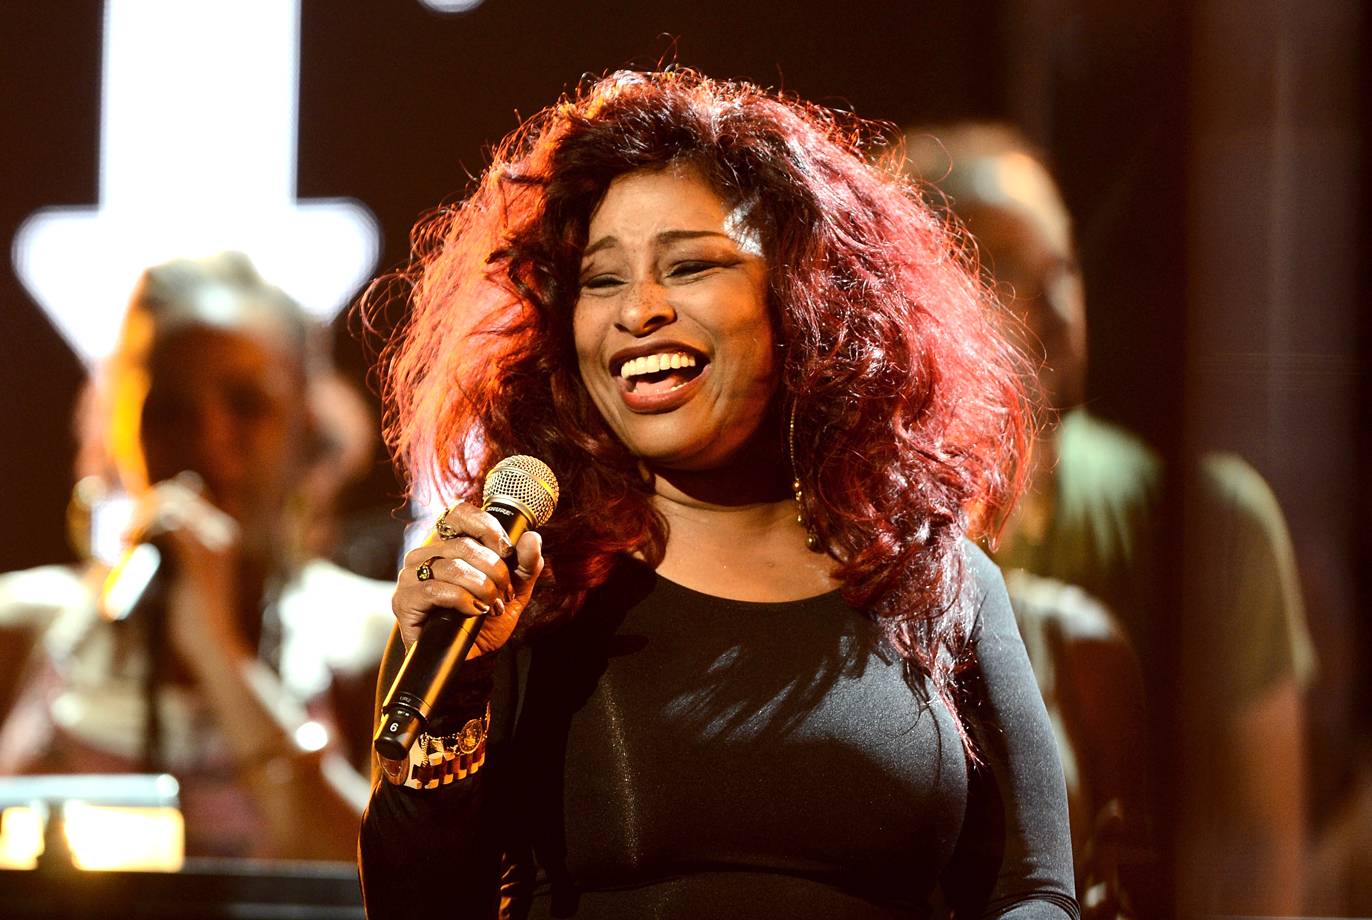 Chaka Khan - Singer Chaka Khan peforms onstage at day 2 of the 2012 BET Awards rehearsals held at The Shrine Auditorium on June 29, 2012 in Los Angeles, California. (Photo: Michael Buckner/Getty Images For BET)